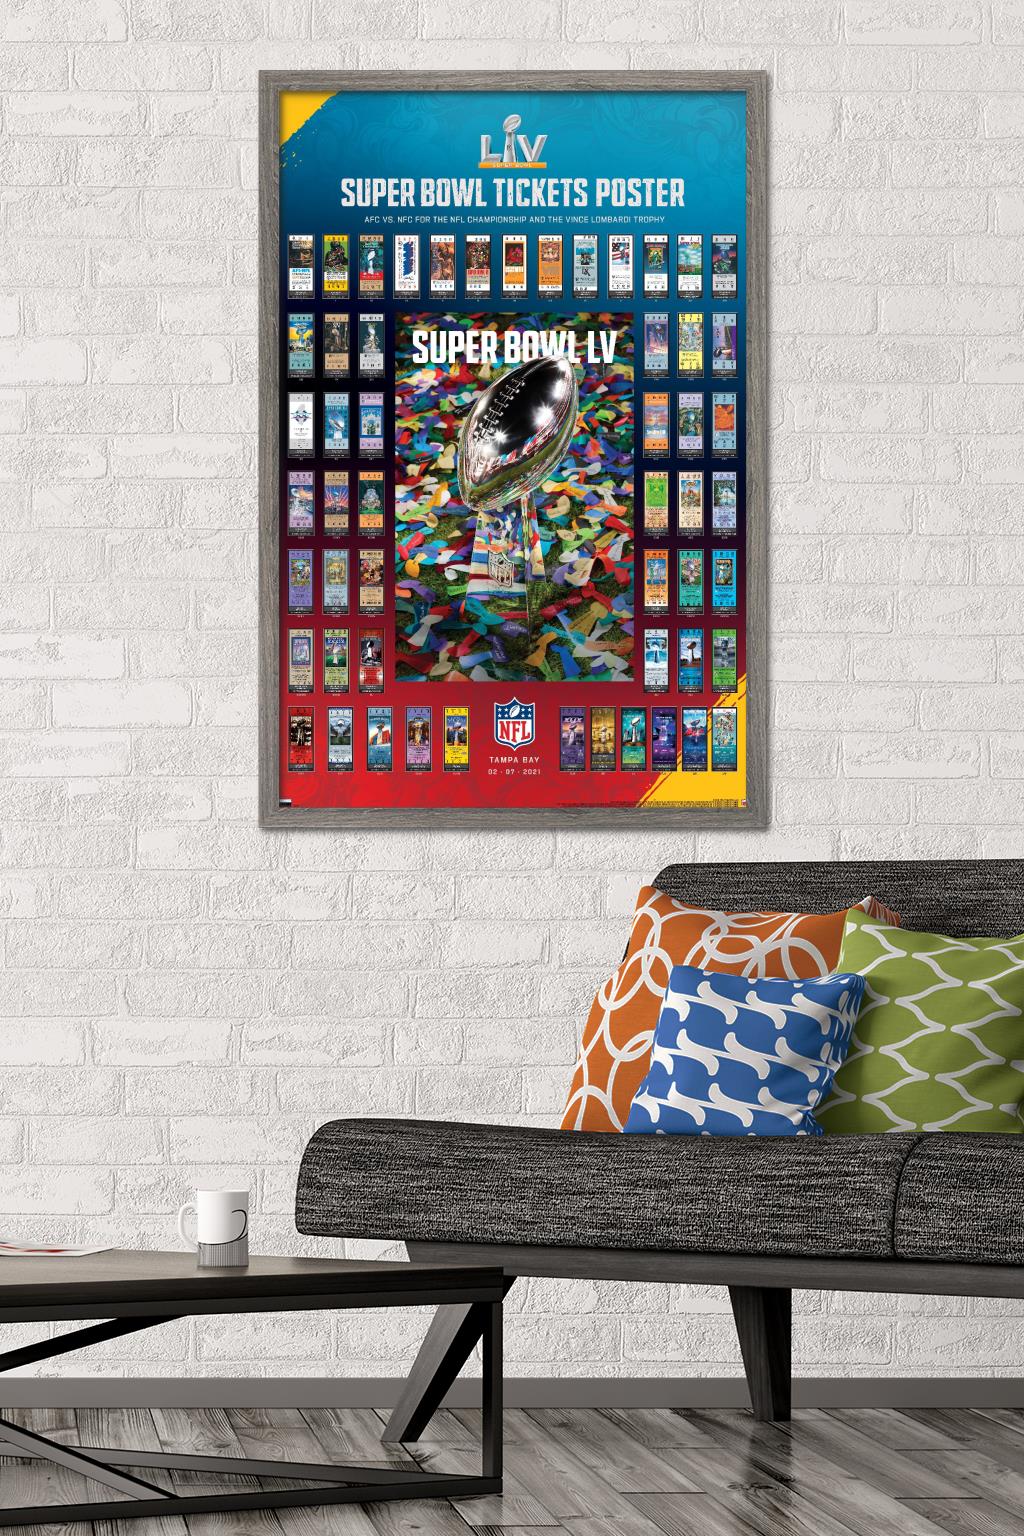 Trends International NFL League - Super Bowl LV - Tickets Wall Poster 24.25" x 35.75" x .75" Barnwood Framed Version - image 2 of 5